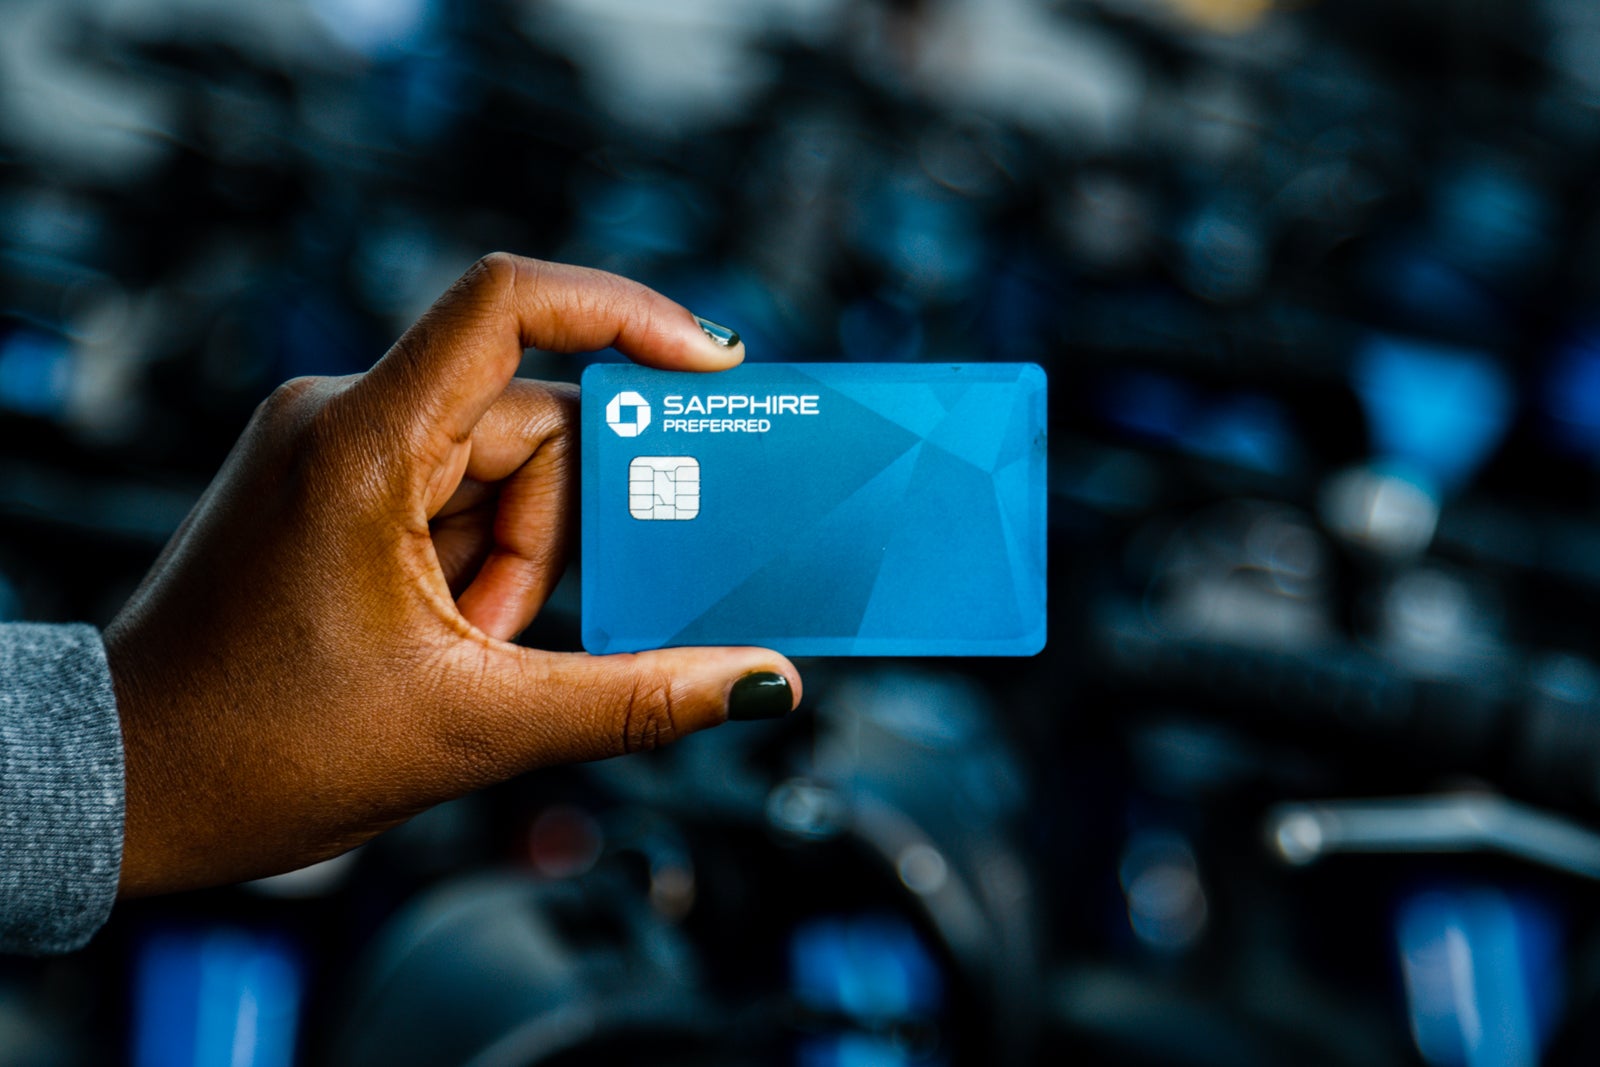 Chase Sapphire Preferred card